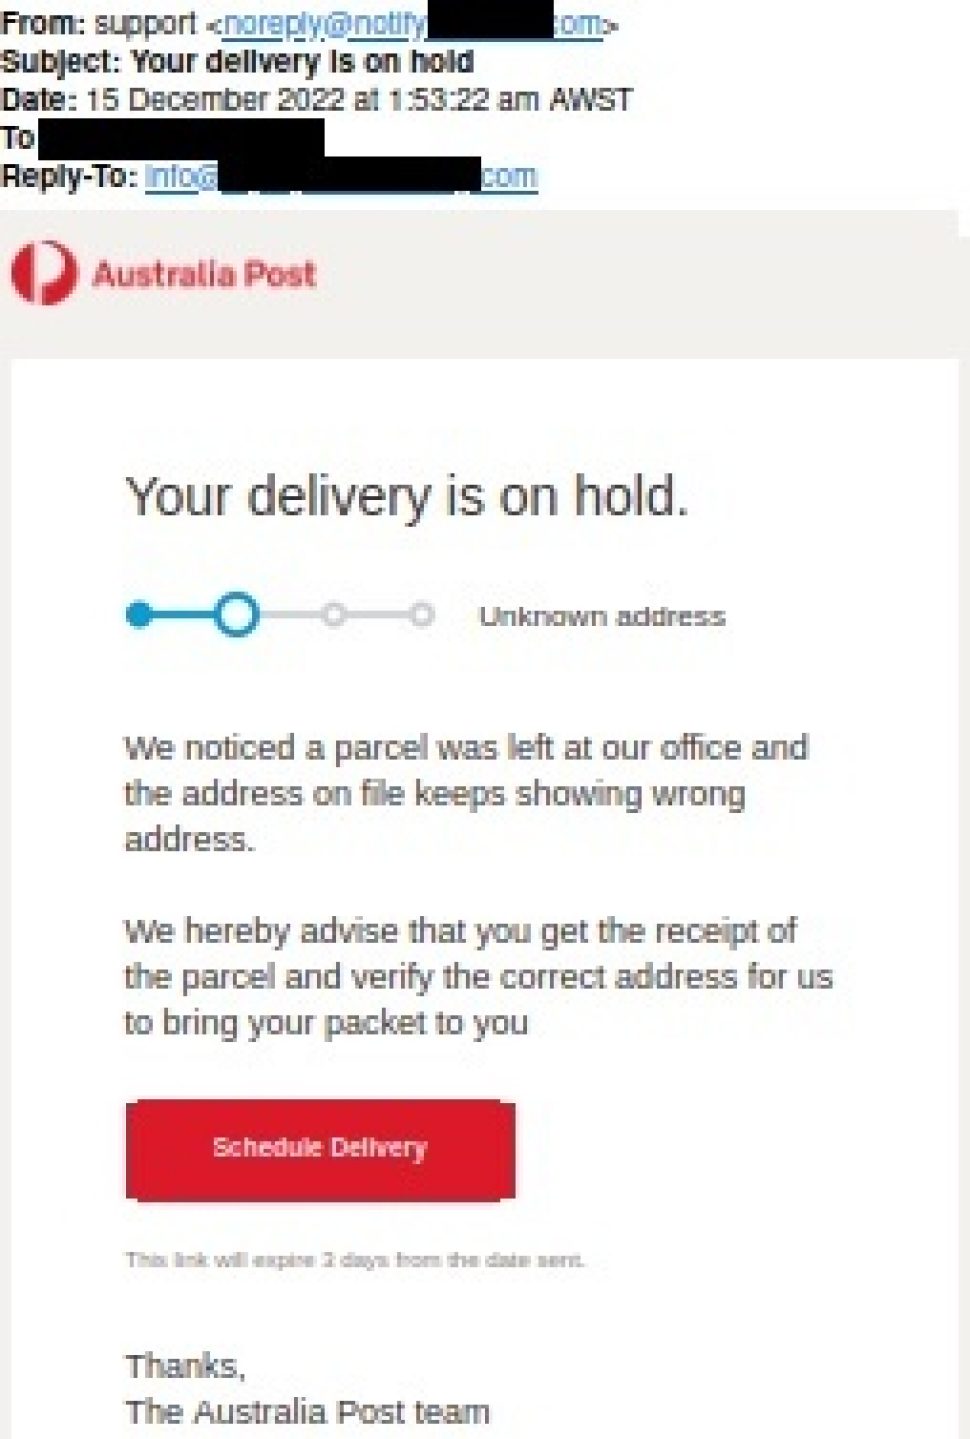 The subject of the Email reads ‘Your Delivery is on hold’
the message has a Australia Post logo  and reads as below.

“We noticed a parcel was left our office and the address on file keeps showing wrong address.
We hereby advise that you get the receipt of the parcel and verify the correct address for us to bring your packet to you”
There is a red button to click on with “Schedule Delivery” written on it.